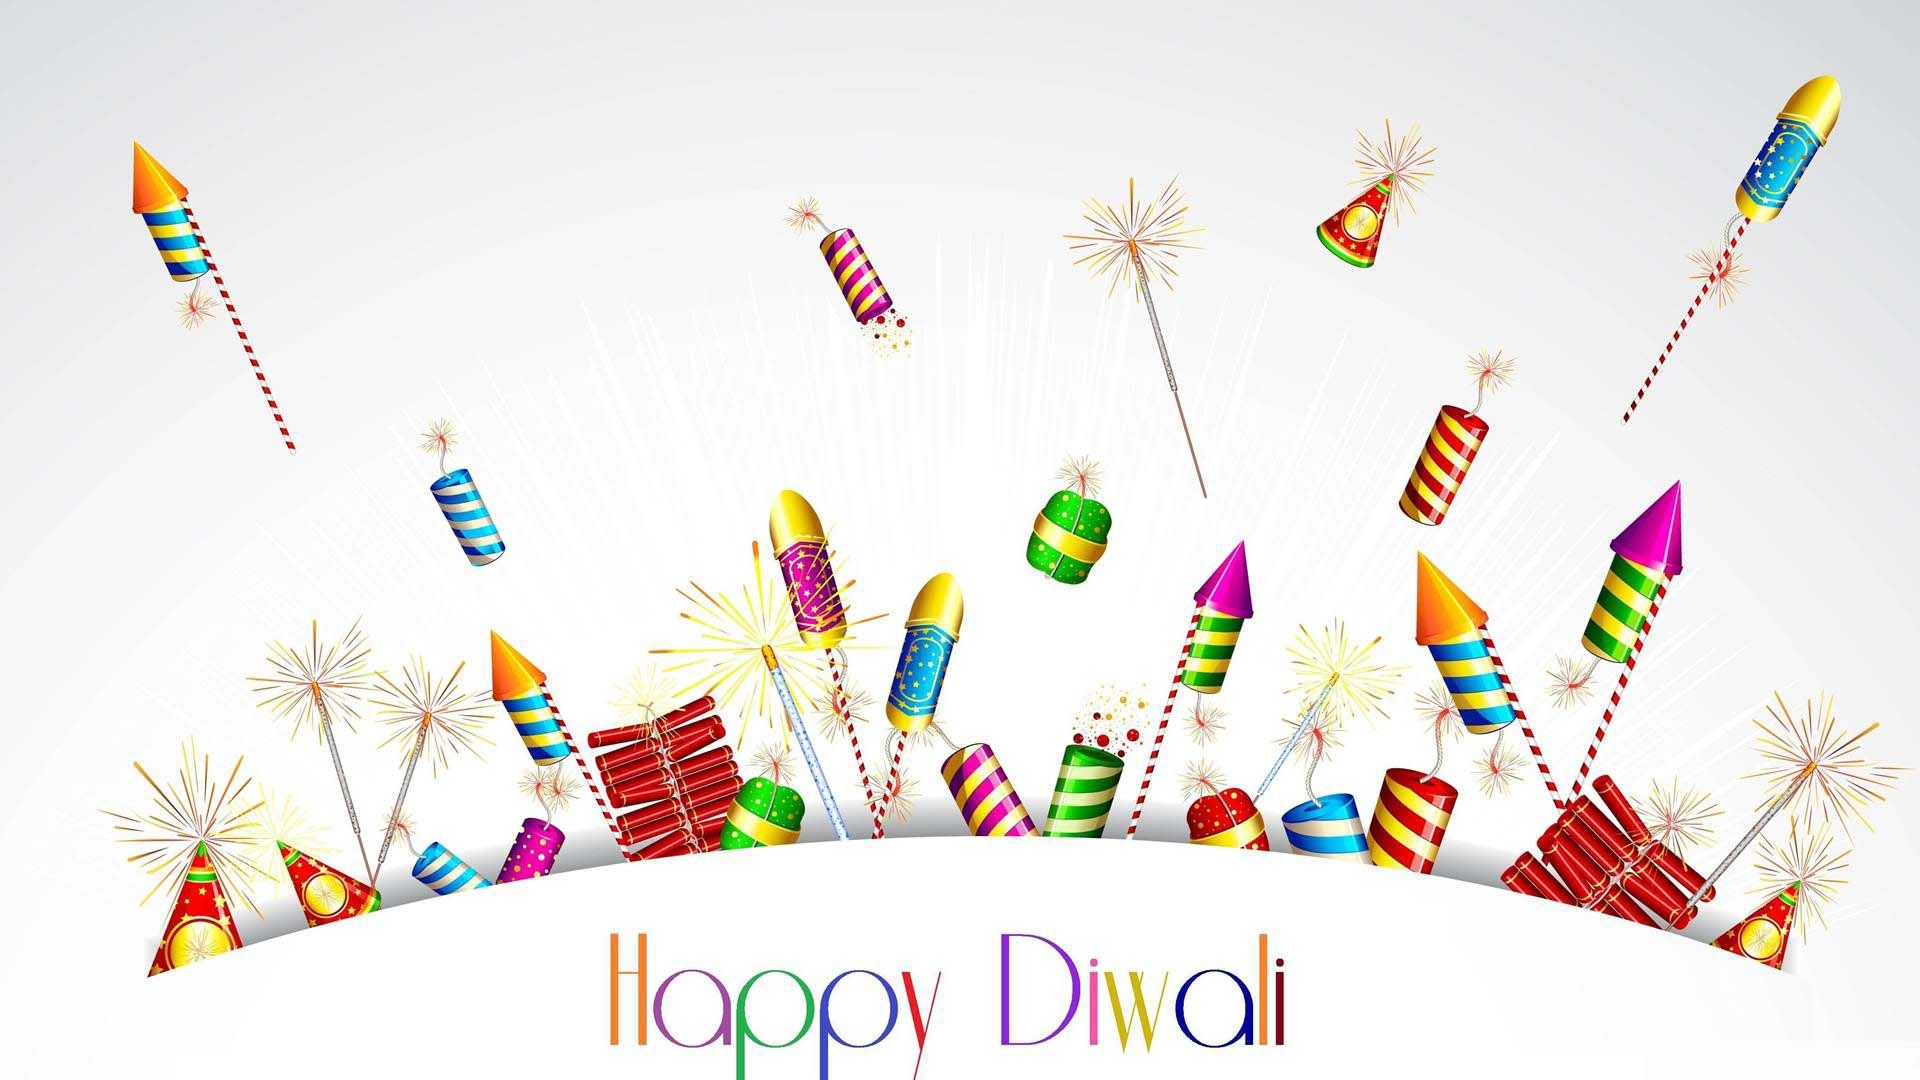 Diwali With Rocket And Bombs Wallpaper - Graphic Design - HD Wallpaper 